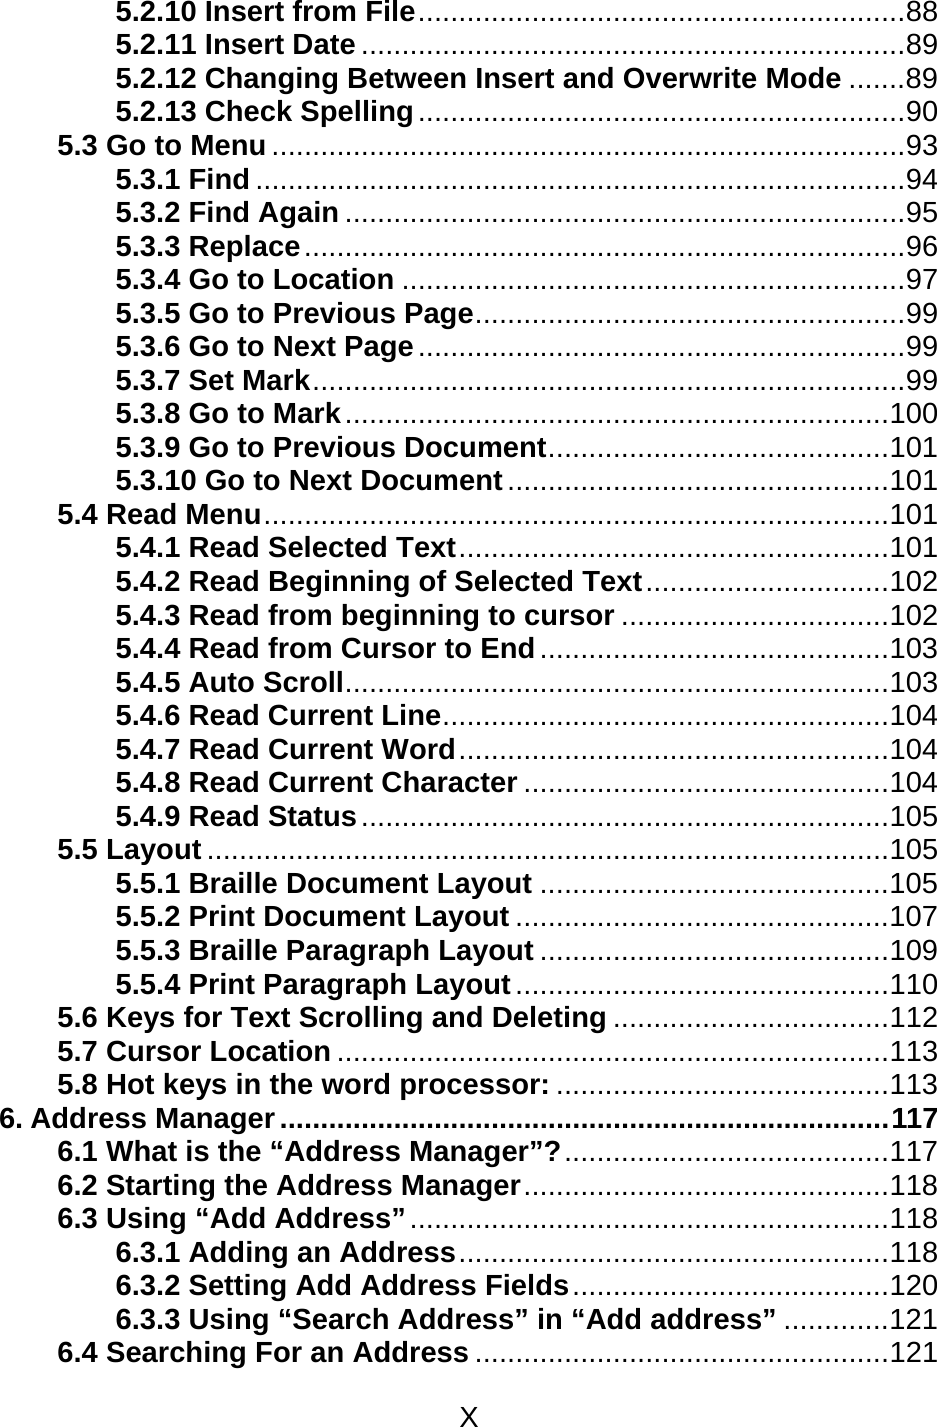 X  5.2.10 Insert from File............................................................88 5.2.11 Insert Date ...................................................................89 5.2.12 Changing Between Insert and Overwrite Mode .......89 5.2.13 Check Spelling............................................................90 5.3 Go to Menu ..............................................................................93 5.3.1 Find ................................................................................94 5.3.2 Find Again .....................................................................95 5.3.3 Replace..........................................................................96 5.3.4 Go to Location ..............................................................97 5.3.5 Go to Previous Page.....................................................99 5.3.6 Go to Next Page............................................................99 5.3.7 Set Mark.........................................................................99 5.3.8 Go to Mark...................................................................100 5.3.9 Go to Previous Document..........................................101 5.3.10 Go to Next Document...............................................101 5.4 Read Menu.............................................................................101 5.4.1 Read Selected Text.....................................................101 5.4.2 Read Beginning of Selected Text..............................102 5.4.3 Read from beginning to cursor .................................102 5.4.4 Read from Cursor to End...........................................103 5.4.5 Auto Scroll...................................................................103 5.4.6 Read Current Line.......................................................104 5.4.7 Read Current Word.....................................................104 5.4.8 Read Current Character .............................................104 5.4.9 Read Status.................................................................105 5.5 Layout ....................................................................................105 5.5.1 Braille Document Layout ...........................................105 5.5.2 Print Document Layout ..............................................107 5.5.3 Braille Paragraph Layout ...........................................109 5.5.4 Print Paragraph Layout..............................................110 5.6 Keys for Text Scrolling and Deleting ..................................112 5.7 Cursor Location ....................................................................113 5.8 Hot keys in the word processor: .........................................113 6. Address Manager ...........................................................................117 6.1 What is the “Address Manager”?........................................117 6.2 Starting the Address Manager.............................................118 6.3 Using “Add Address”...........................................................118 6.3.1 Adding an Address.....................................................118 6.3.2 Setting Add Address Fields.......................................120 6.3.3 Using “Search Address” in “Add address” .............121 6.4 Searching For an Address ...................................................121 